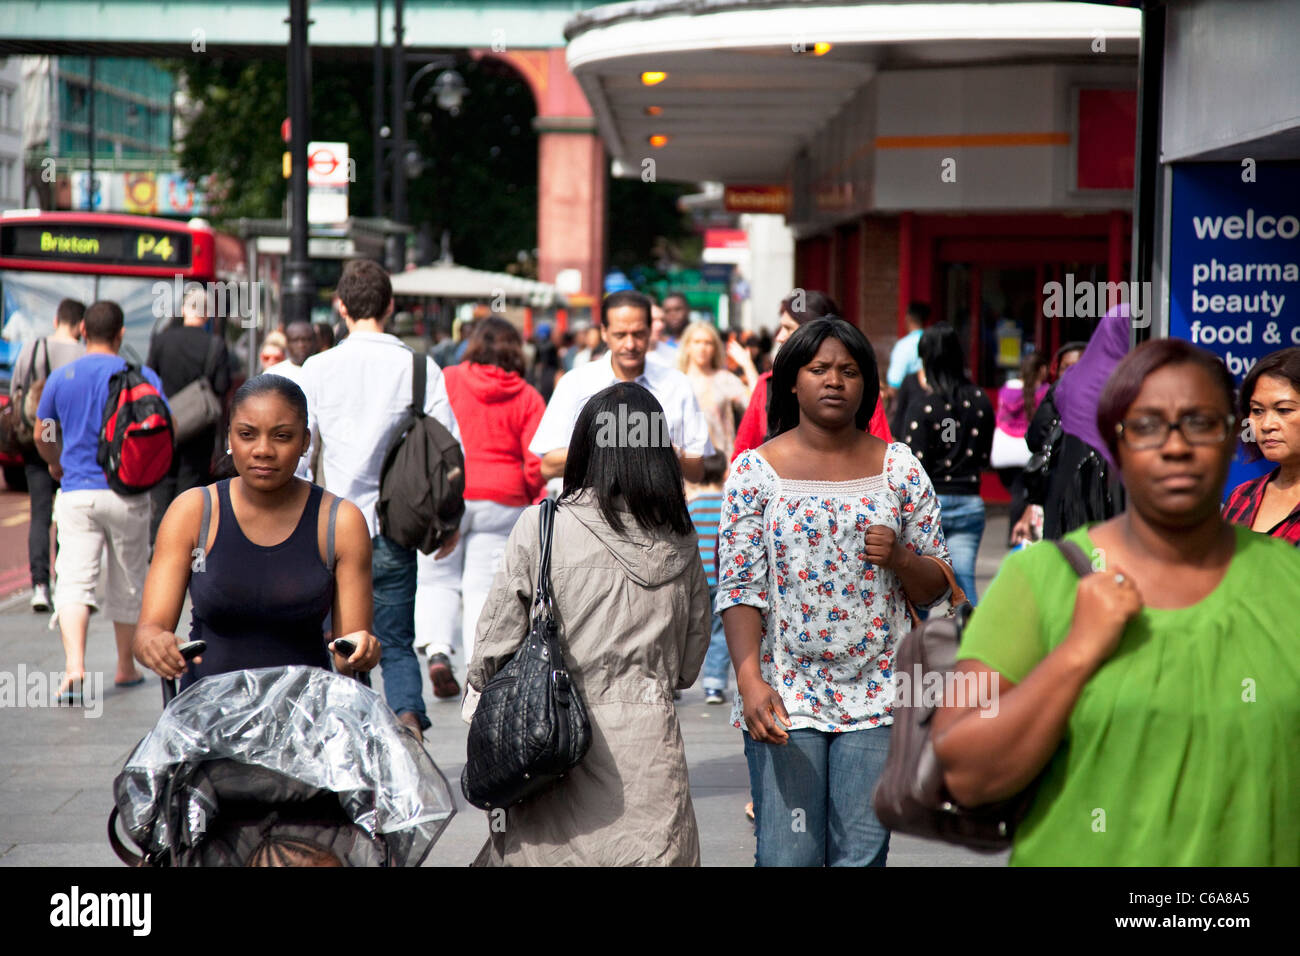 Street scene on Brixton Road, a multicultural area in South London. Known predominantly as a black Caribbean community. Stock Photo